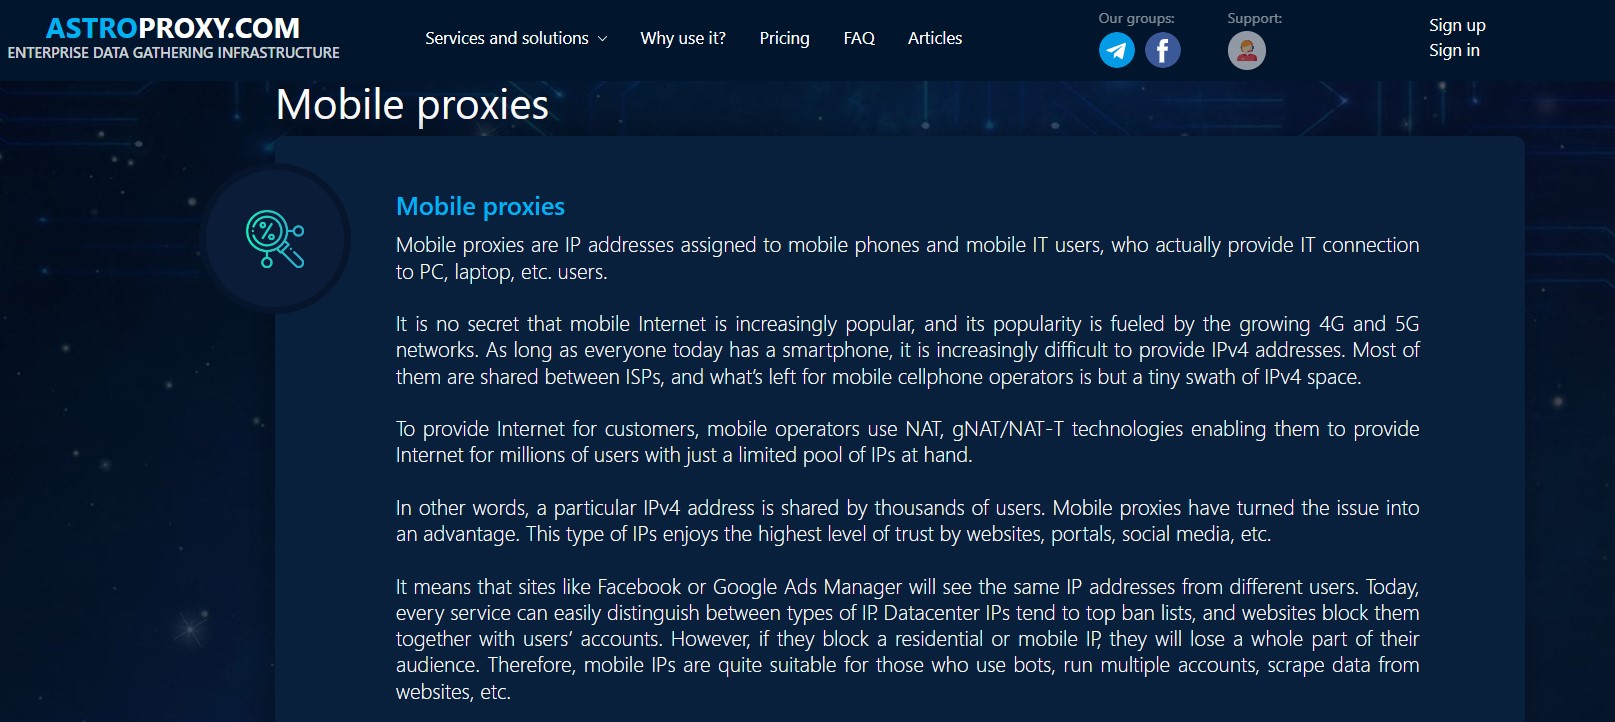 Astroproxy — Cheap Mobile Proxies